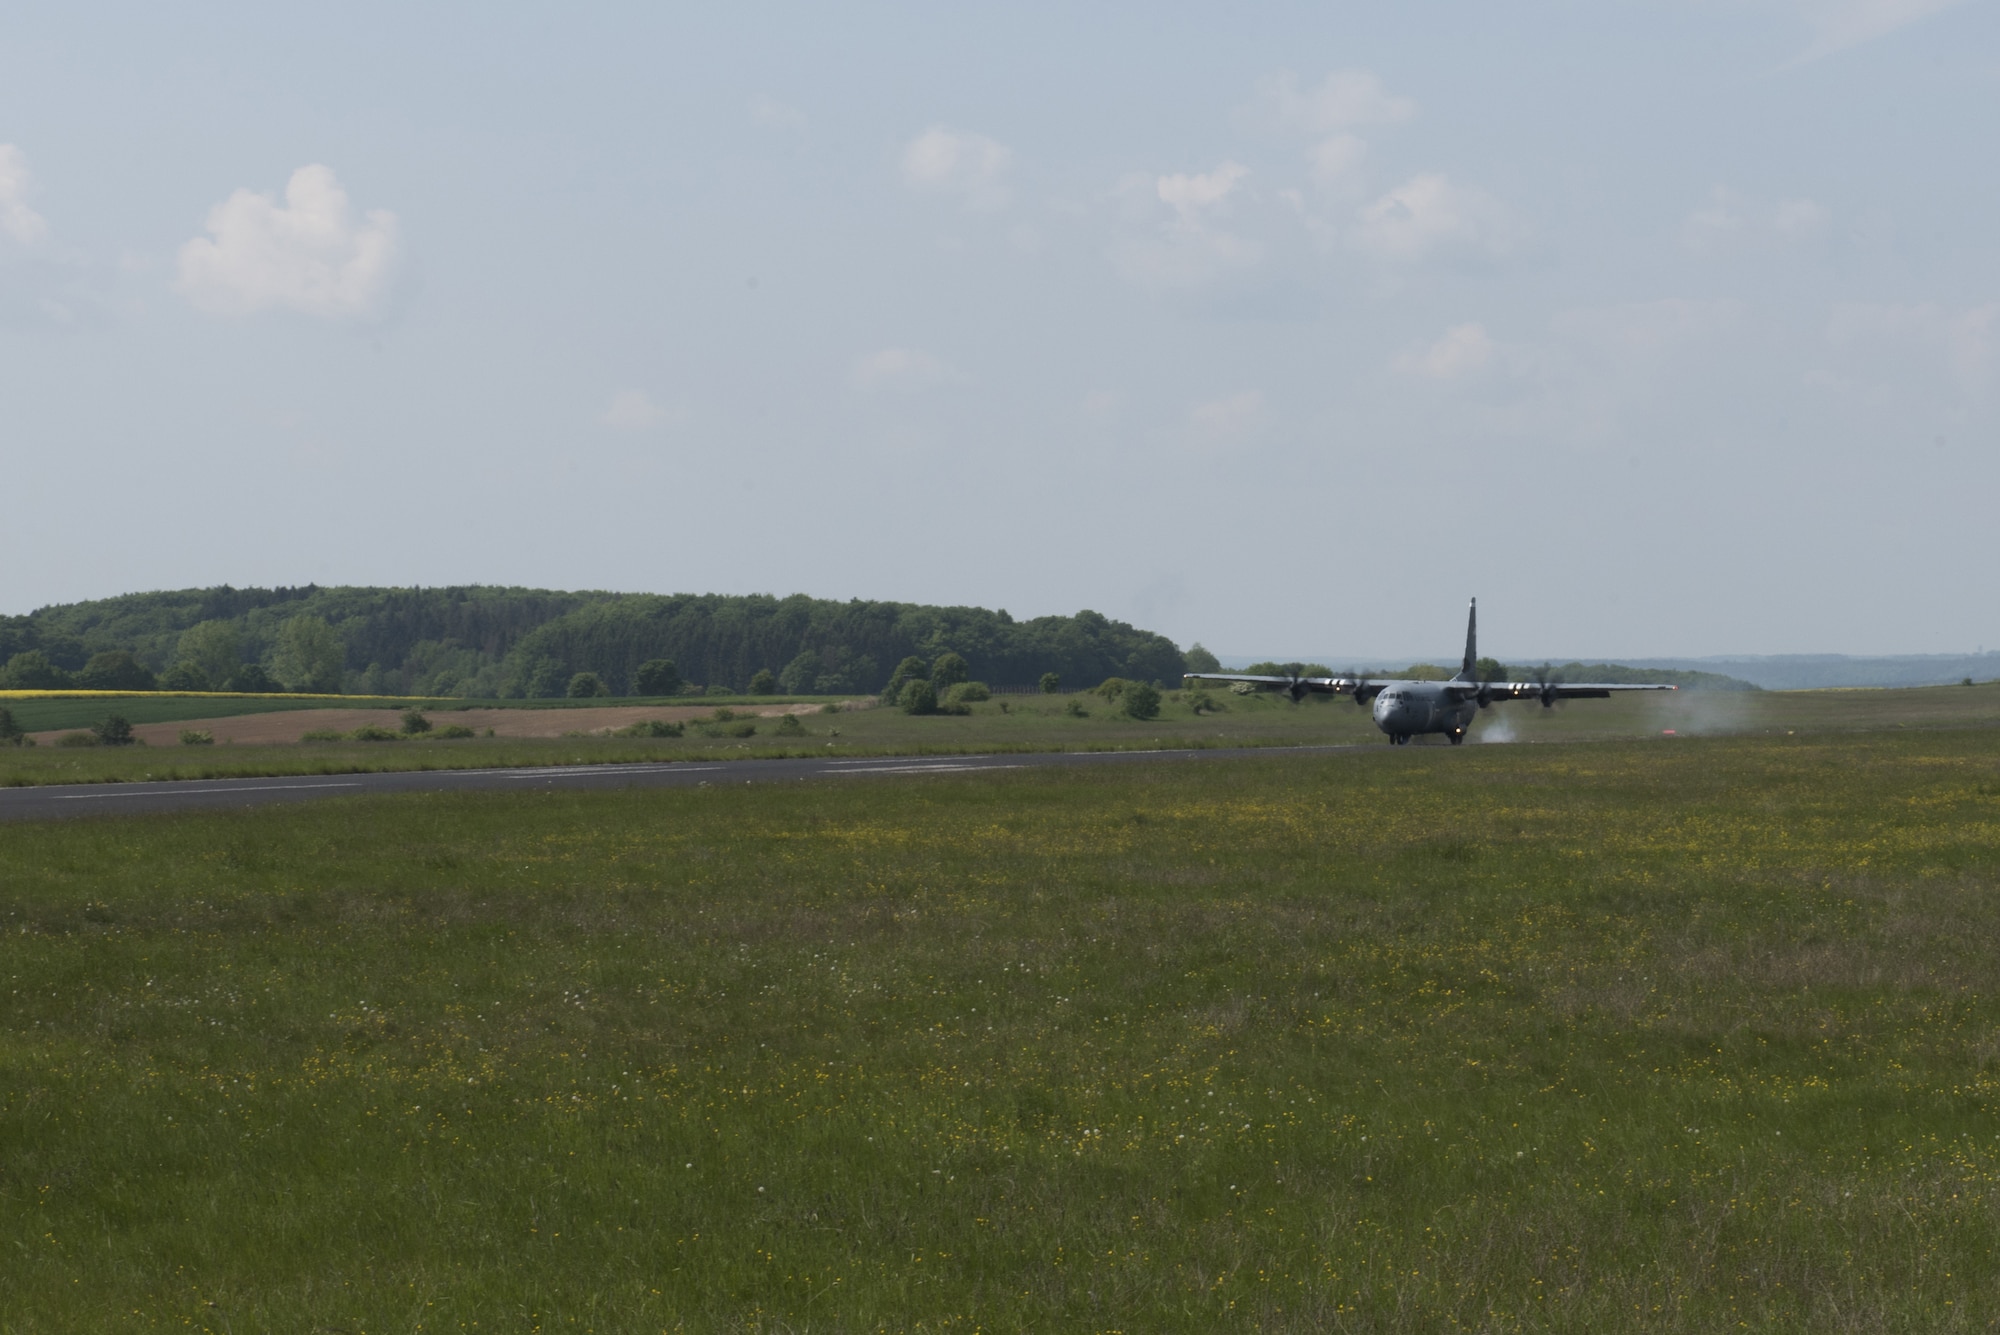 A C-130J touches down on a landing zone prepared by students of the Landing Zone Safety Officer course at Bitburg Airfield, Germany, May 23, 2019. Students surveyed the area, evaluated the pavement, marked the landing zone with panels and communicated with the aircraft via radio. (U.S. Air Force Photo by Airman 1st Class Kaylea Berry)